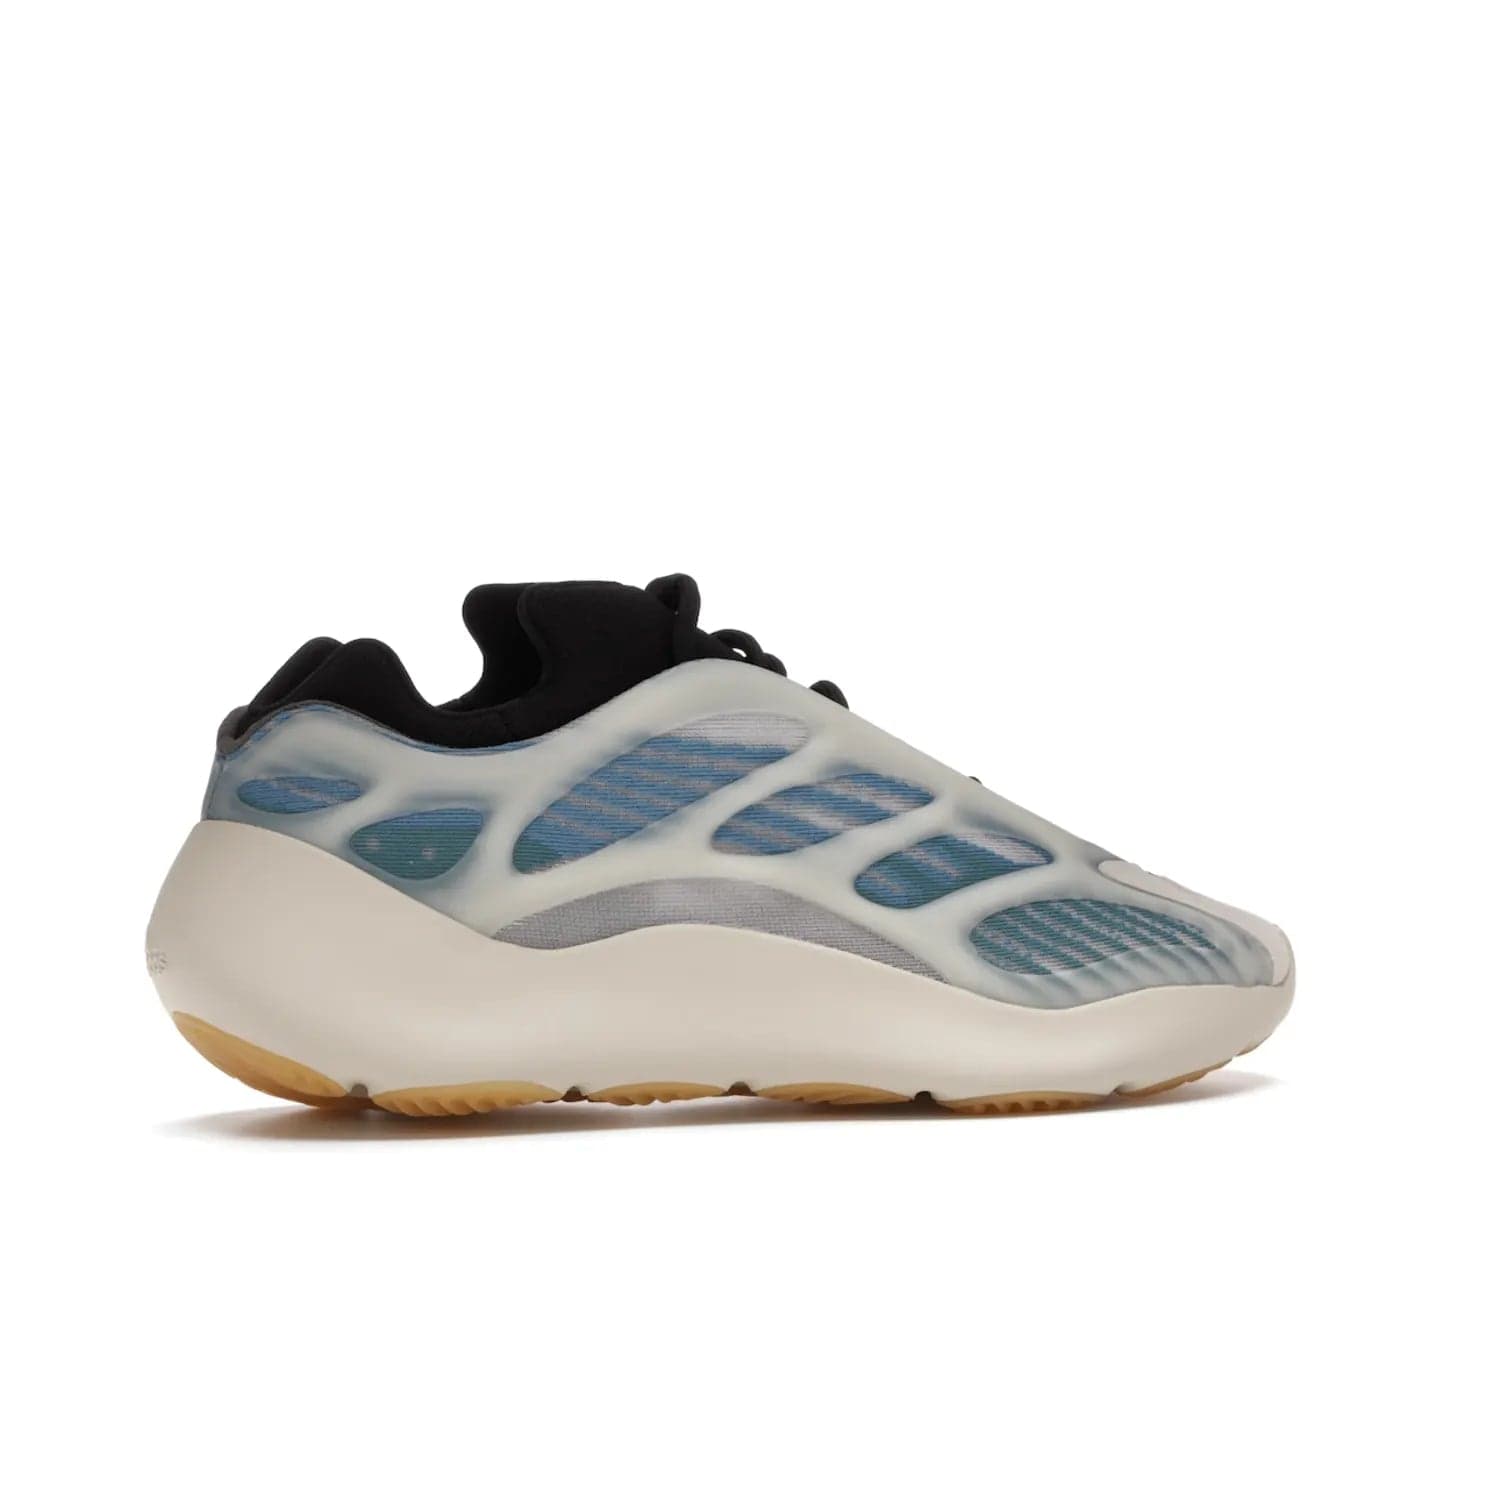 adidas Yeezy 700 V3 Kyanite - Image 35 - Only at www.BallersClubKickz.com - The adidas Yeezy 700 V3 Kyanite offers a layered design featuring a glow-in-the-dark TPU cage and a tonal cream-colored EVA foam midsole. With its herringbone-patterned outsole, the style and comfort of the sneaker will accompany you anywhere. Released in March 2021, it's a great addition to any sneaker wardrobe.